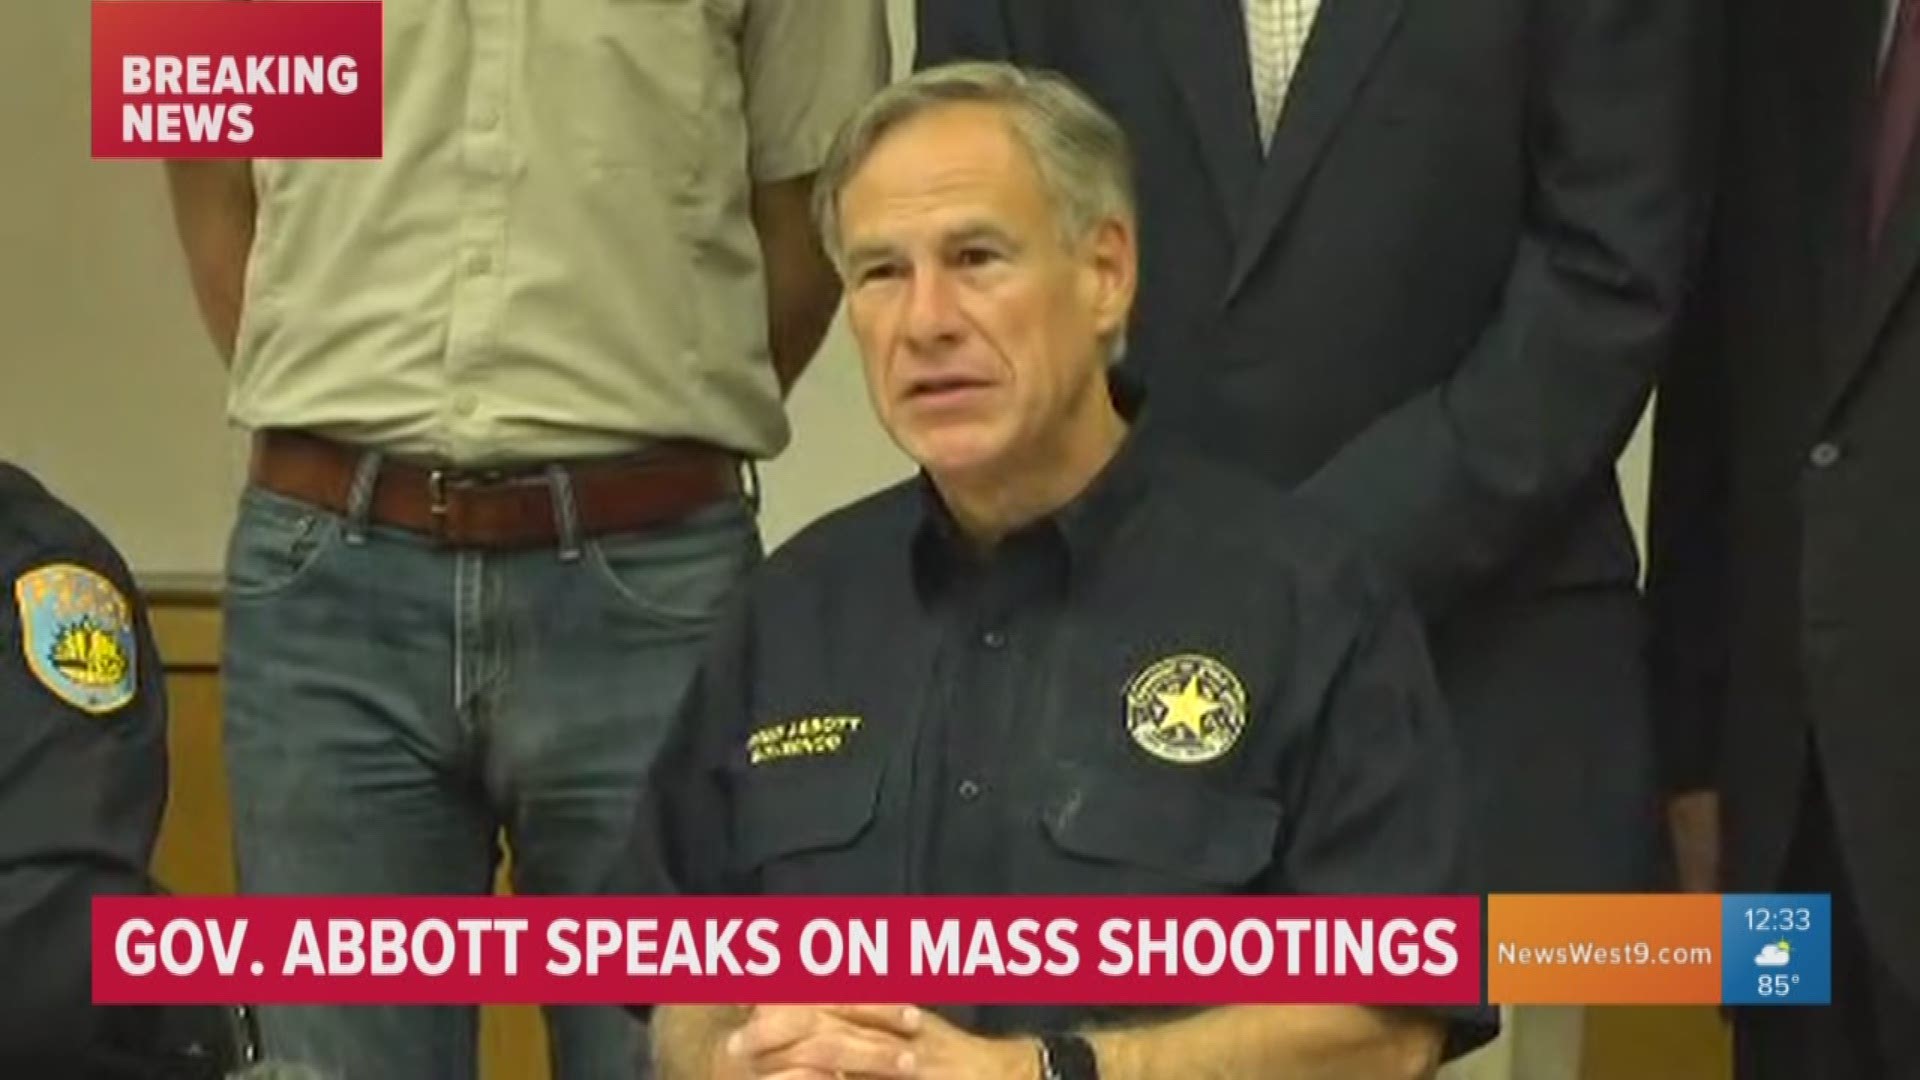 Seven people were killed and 22 more injured in yesterday's mass shooting in West Texas. Officials are confident the shooter acted alone.  Gov. Abbott said we must take action